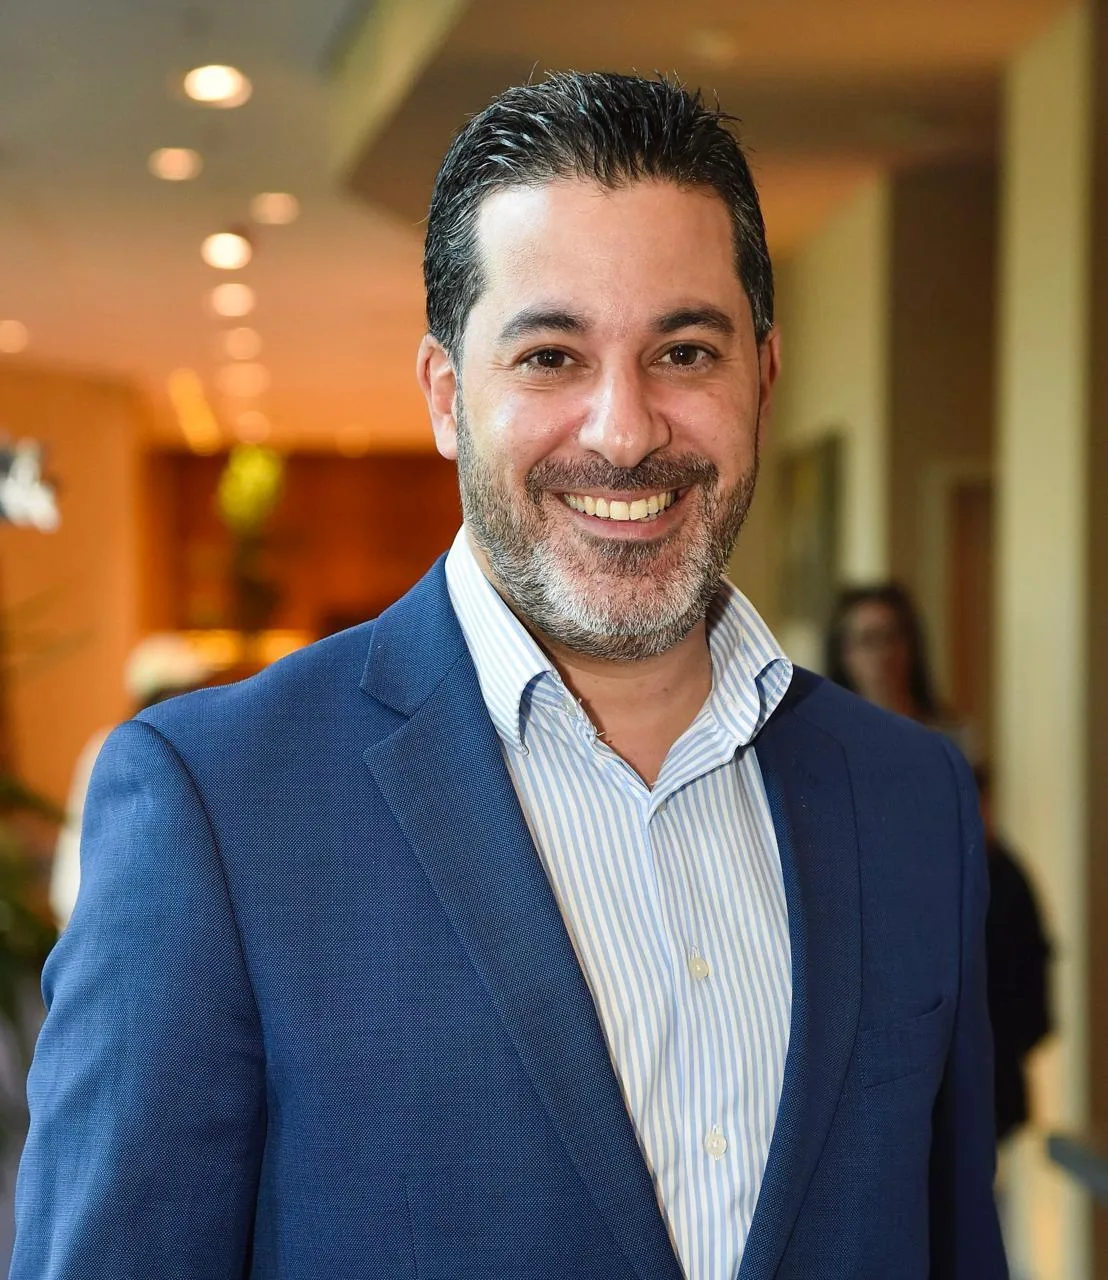 Portrait of Hussein Wehbe smiling confidently in a professional setting, representing effective leadership principles discussed in JOH Partners' podcast on managing workplace dynamics and career growth.